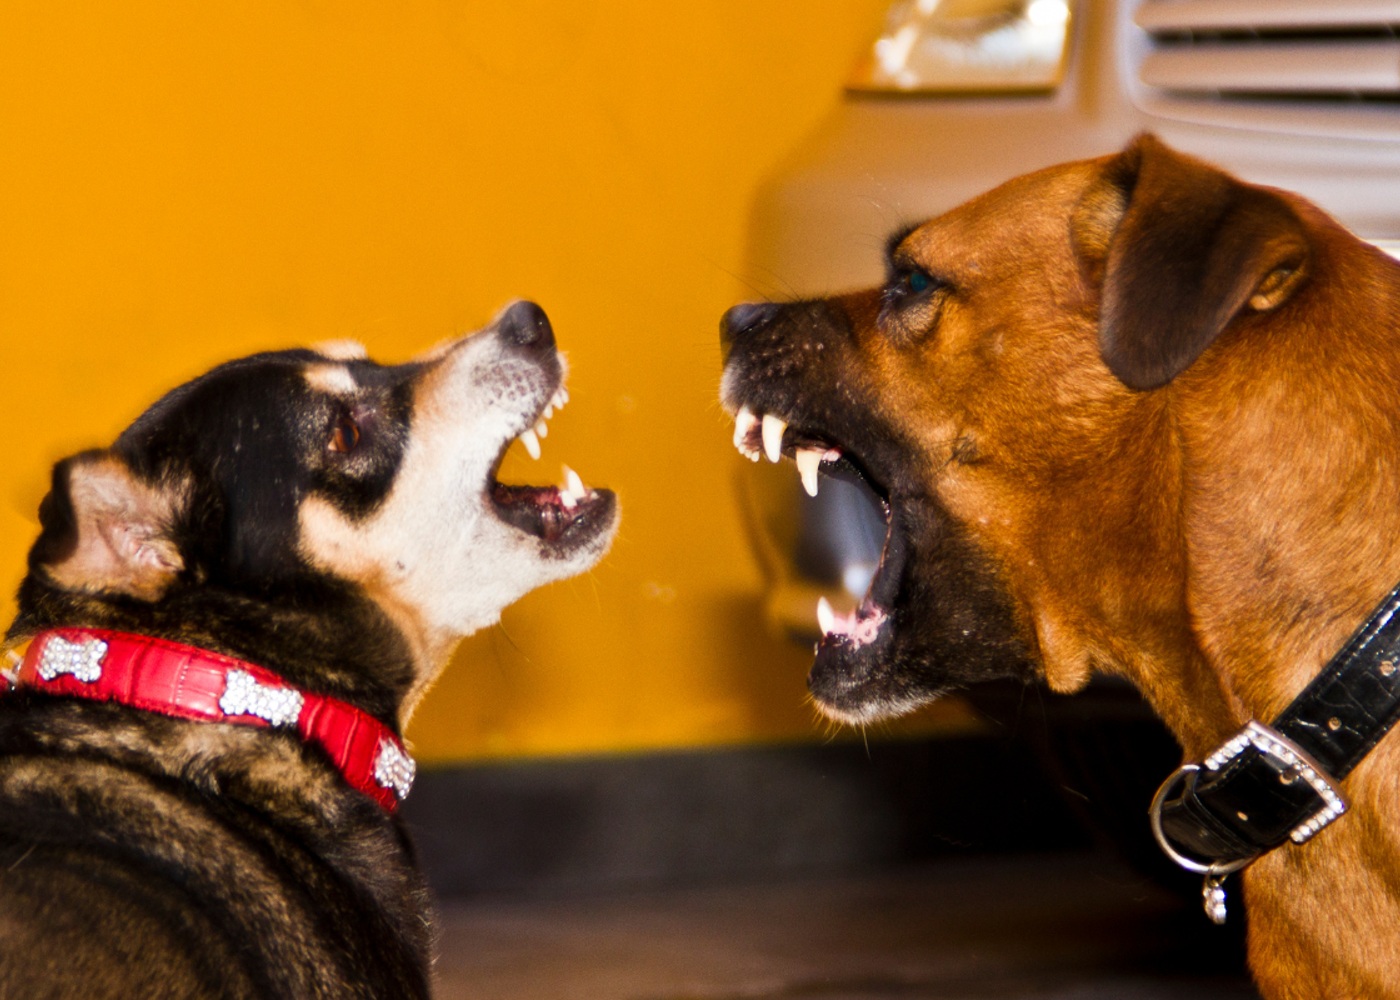 Two dogs barking at each other - discover effective obedience training with Dog Training Elite Central Mass.